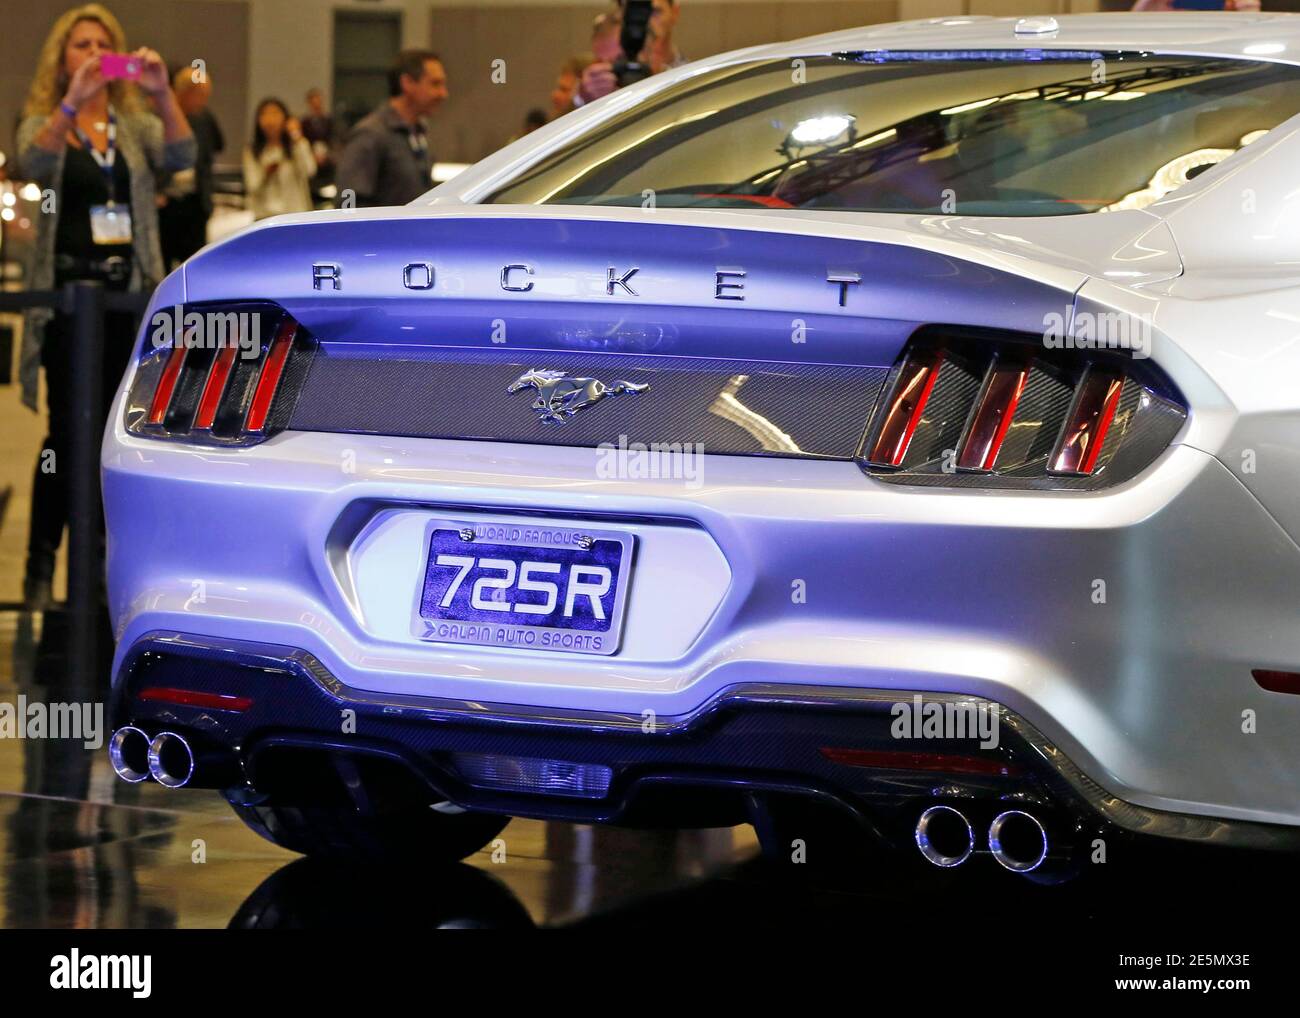 The rear end on a 2015 Ford Mustang from Denmark's Henrik Fisker and California tuning company Galpin Auto Sports called 'Rocket' is seen at its world premiere at the Los Angeles Auto Show in Los Angeles, California November 20, 2014.   REUTERS/Lucy Nicholson (UNITED STATES  - Tags: TRANSPORT BUSINESS) Stock Photo